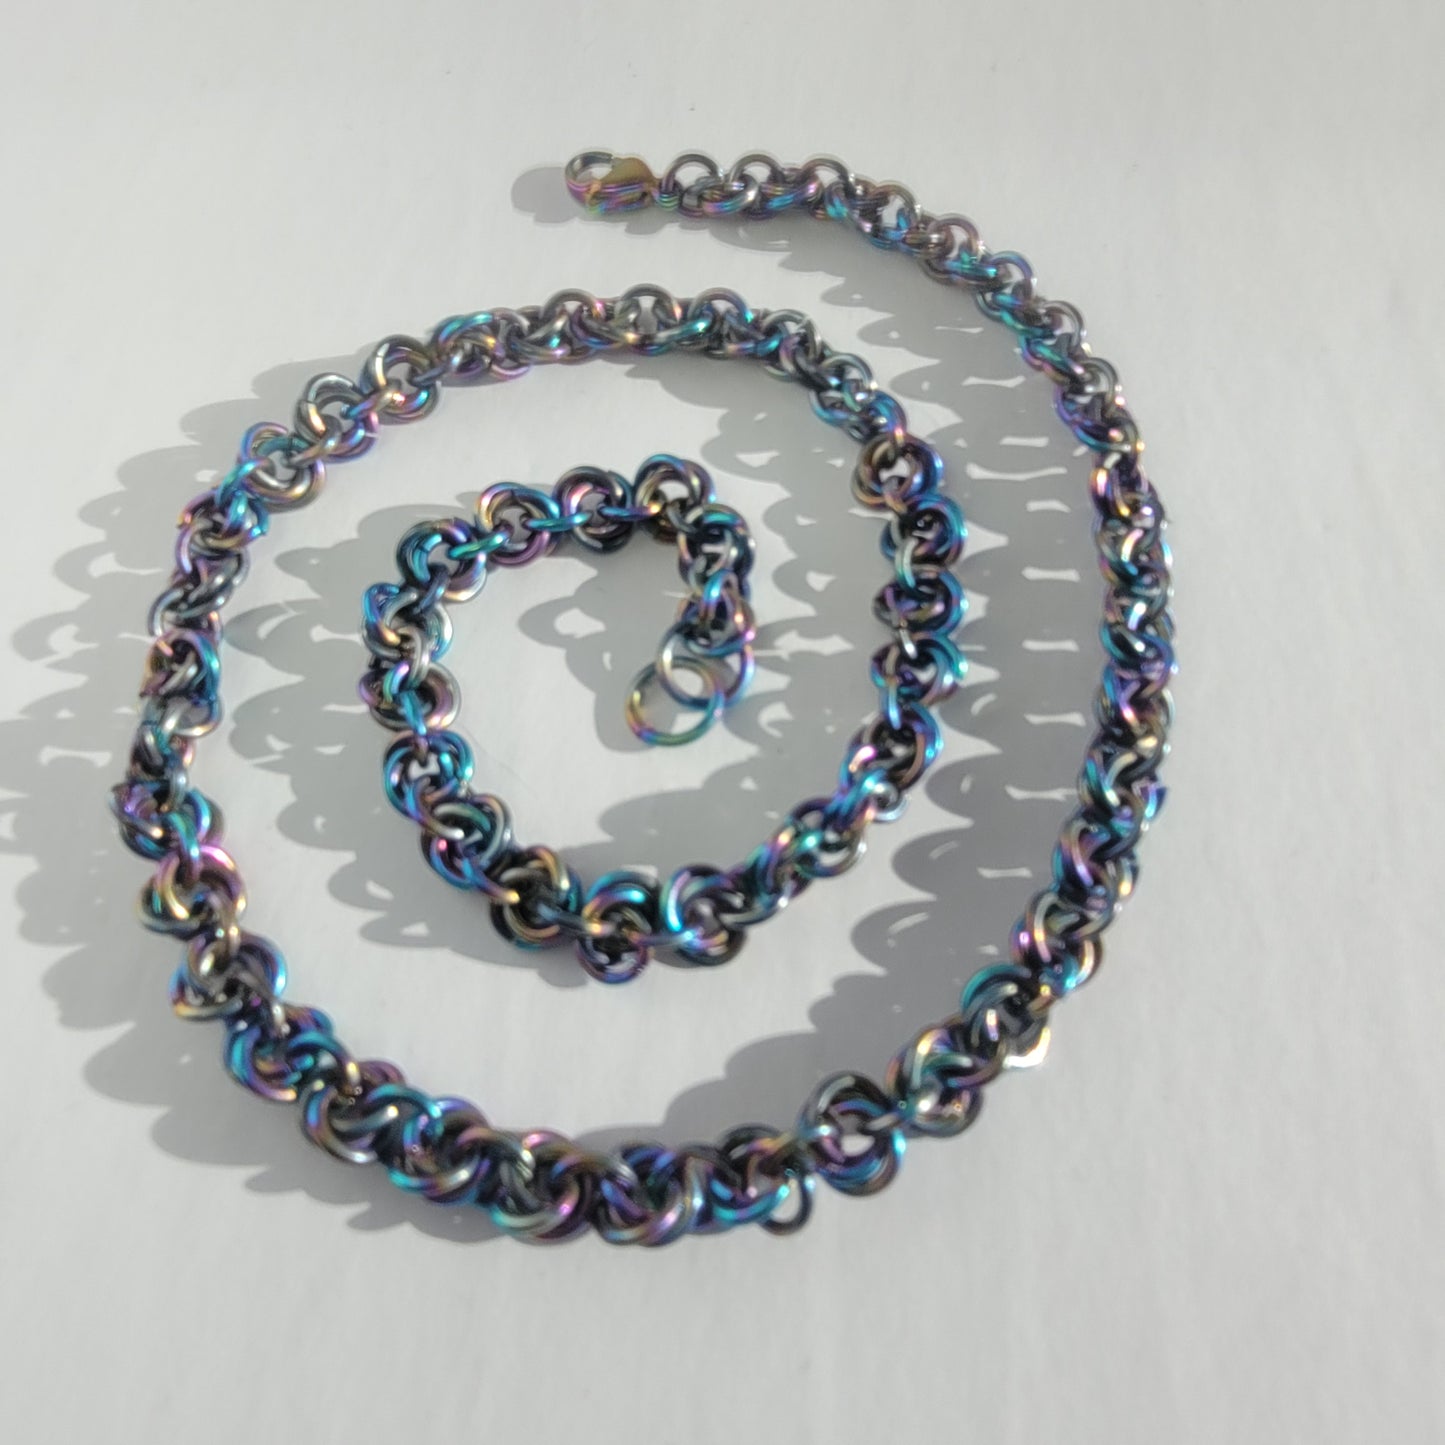 Rainbow rosette chainmail necklace